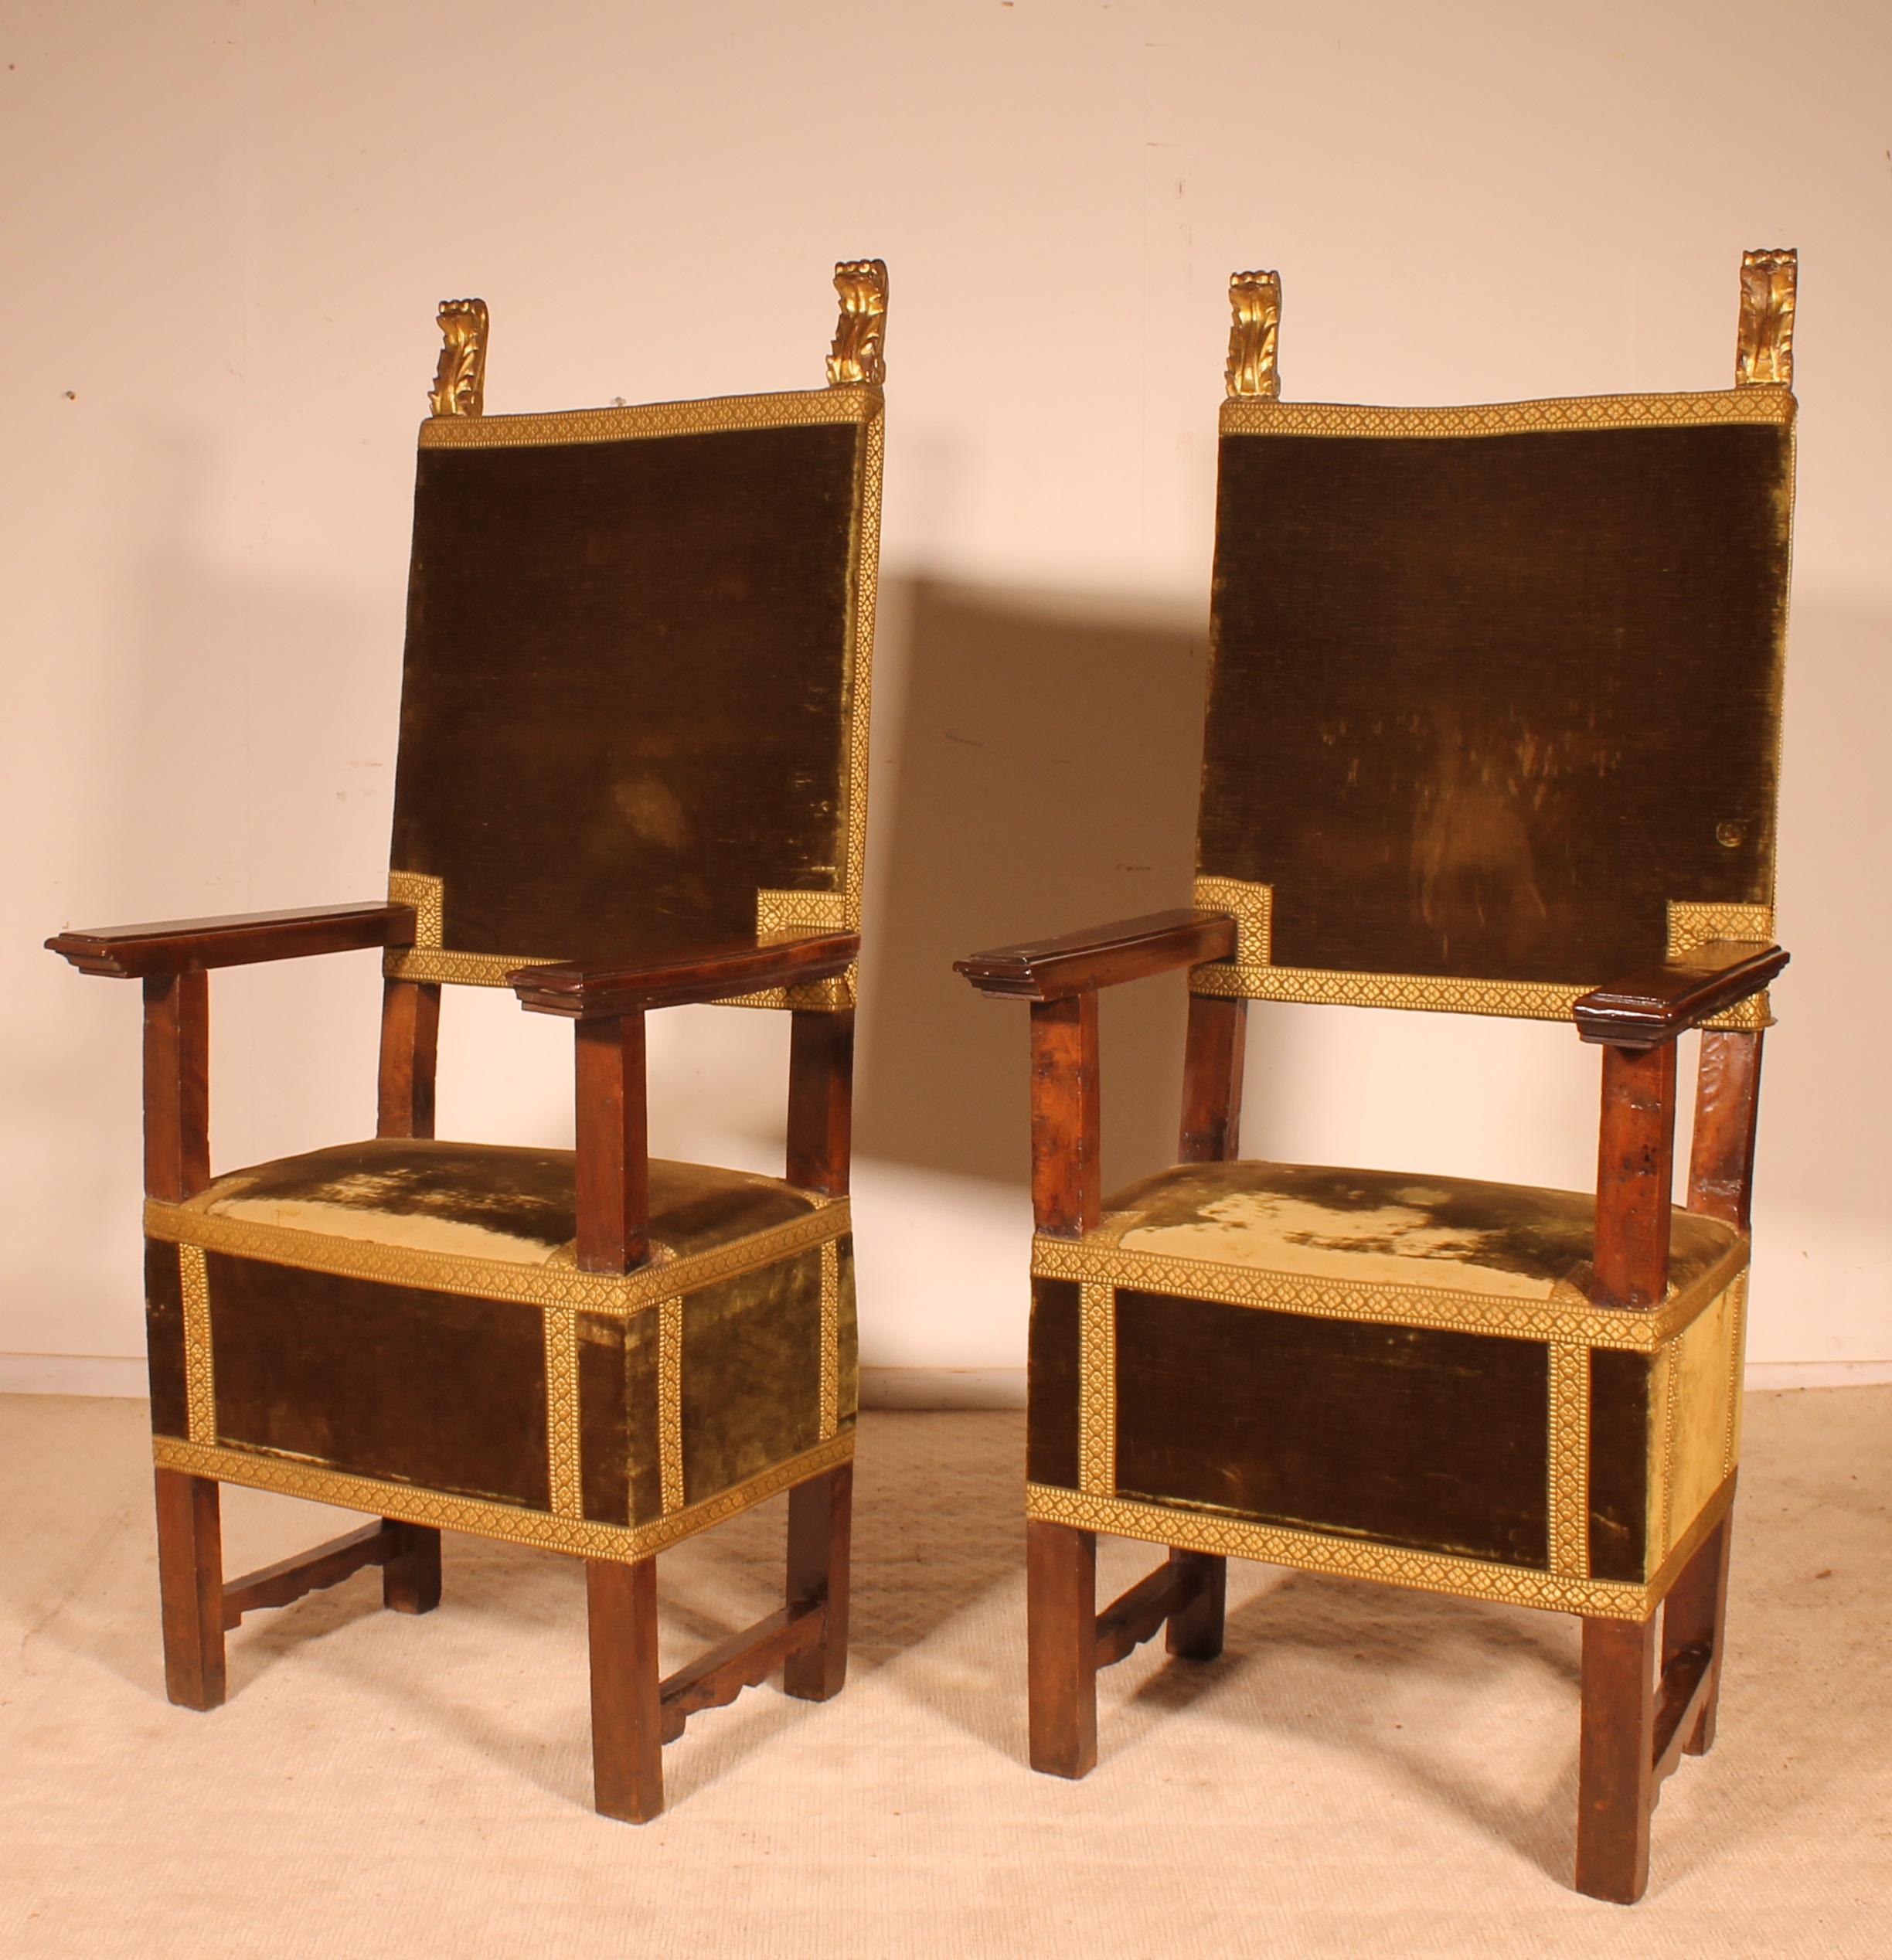 Pair of Italian Armchairs in Walnut circa 1600-Renaissance Period For Sale 1